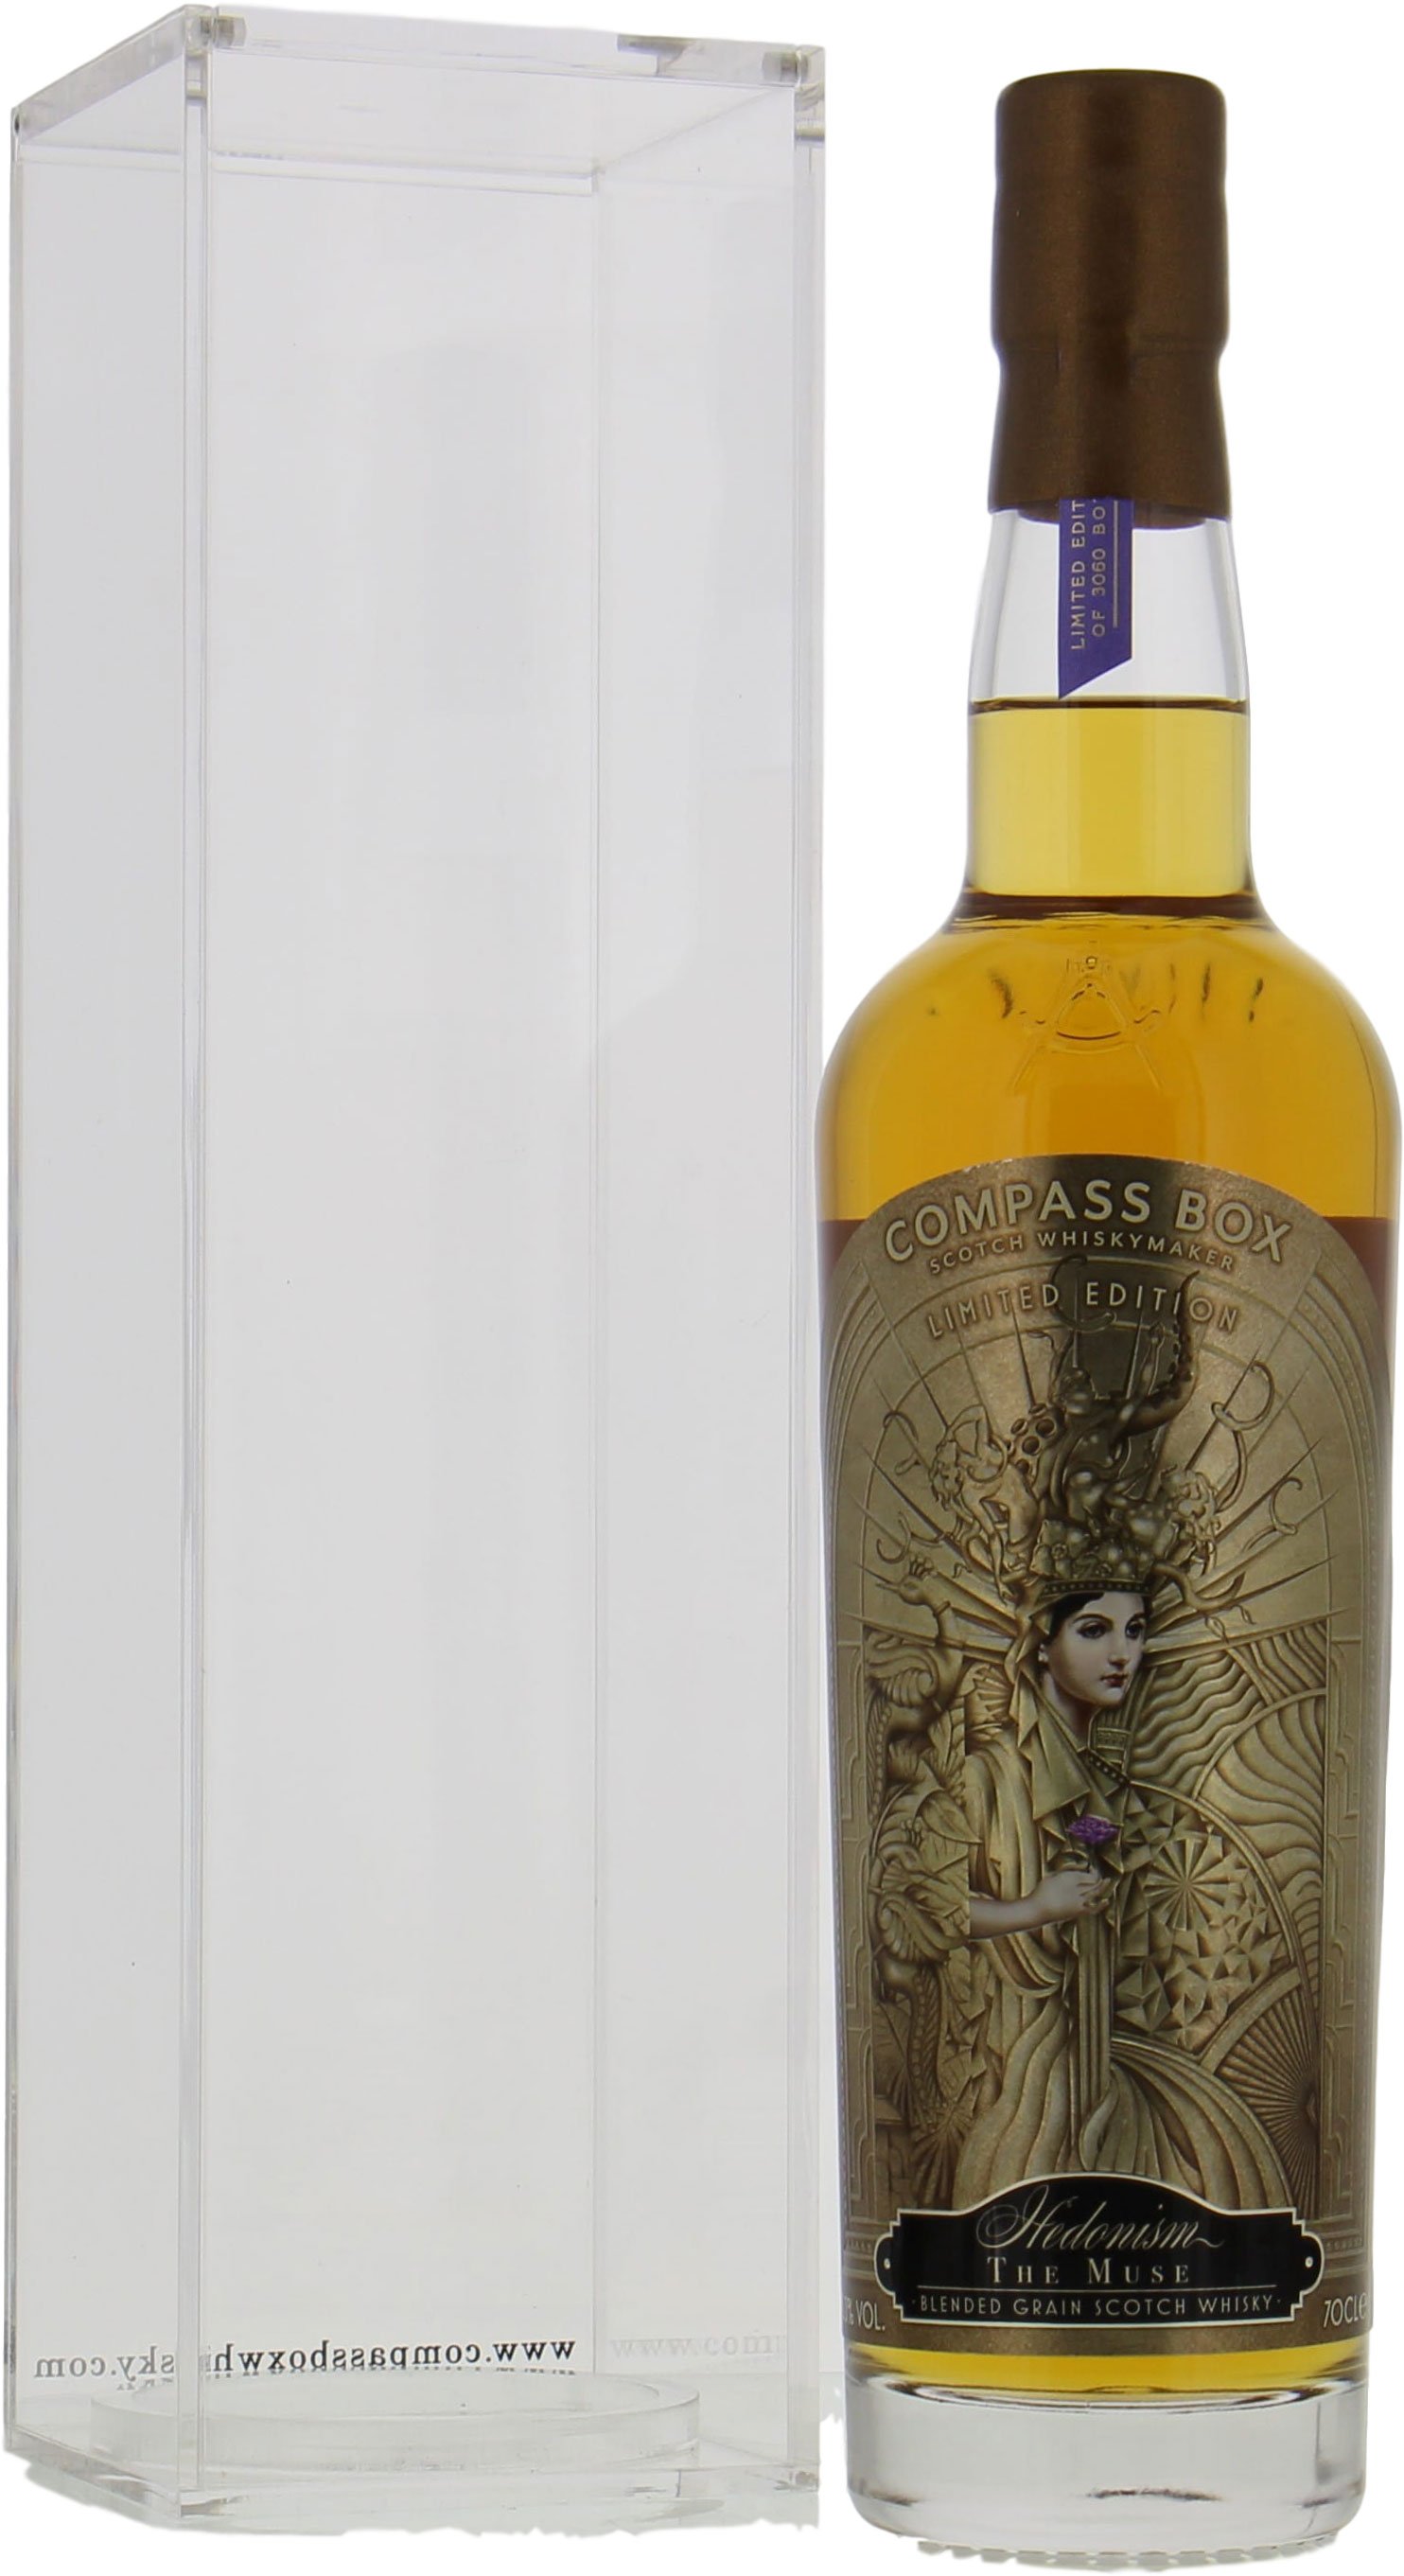 Compass Box - Hedonism The Muse 53.3% NAS In Original Container